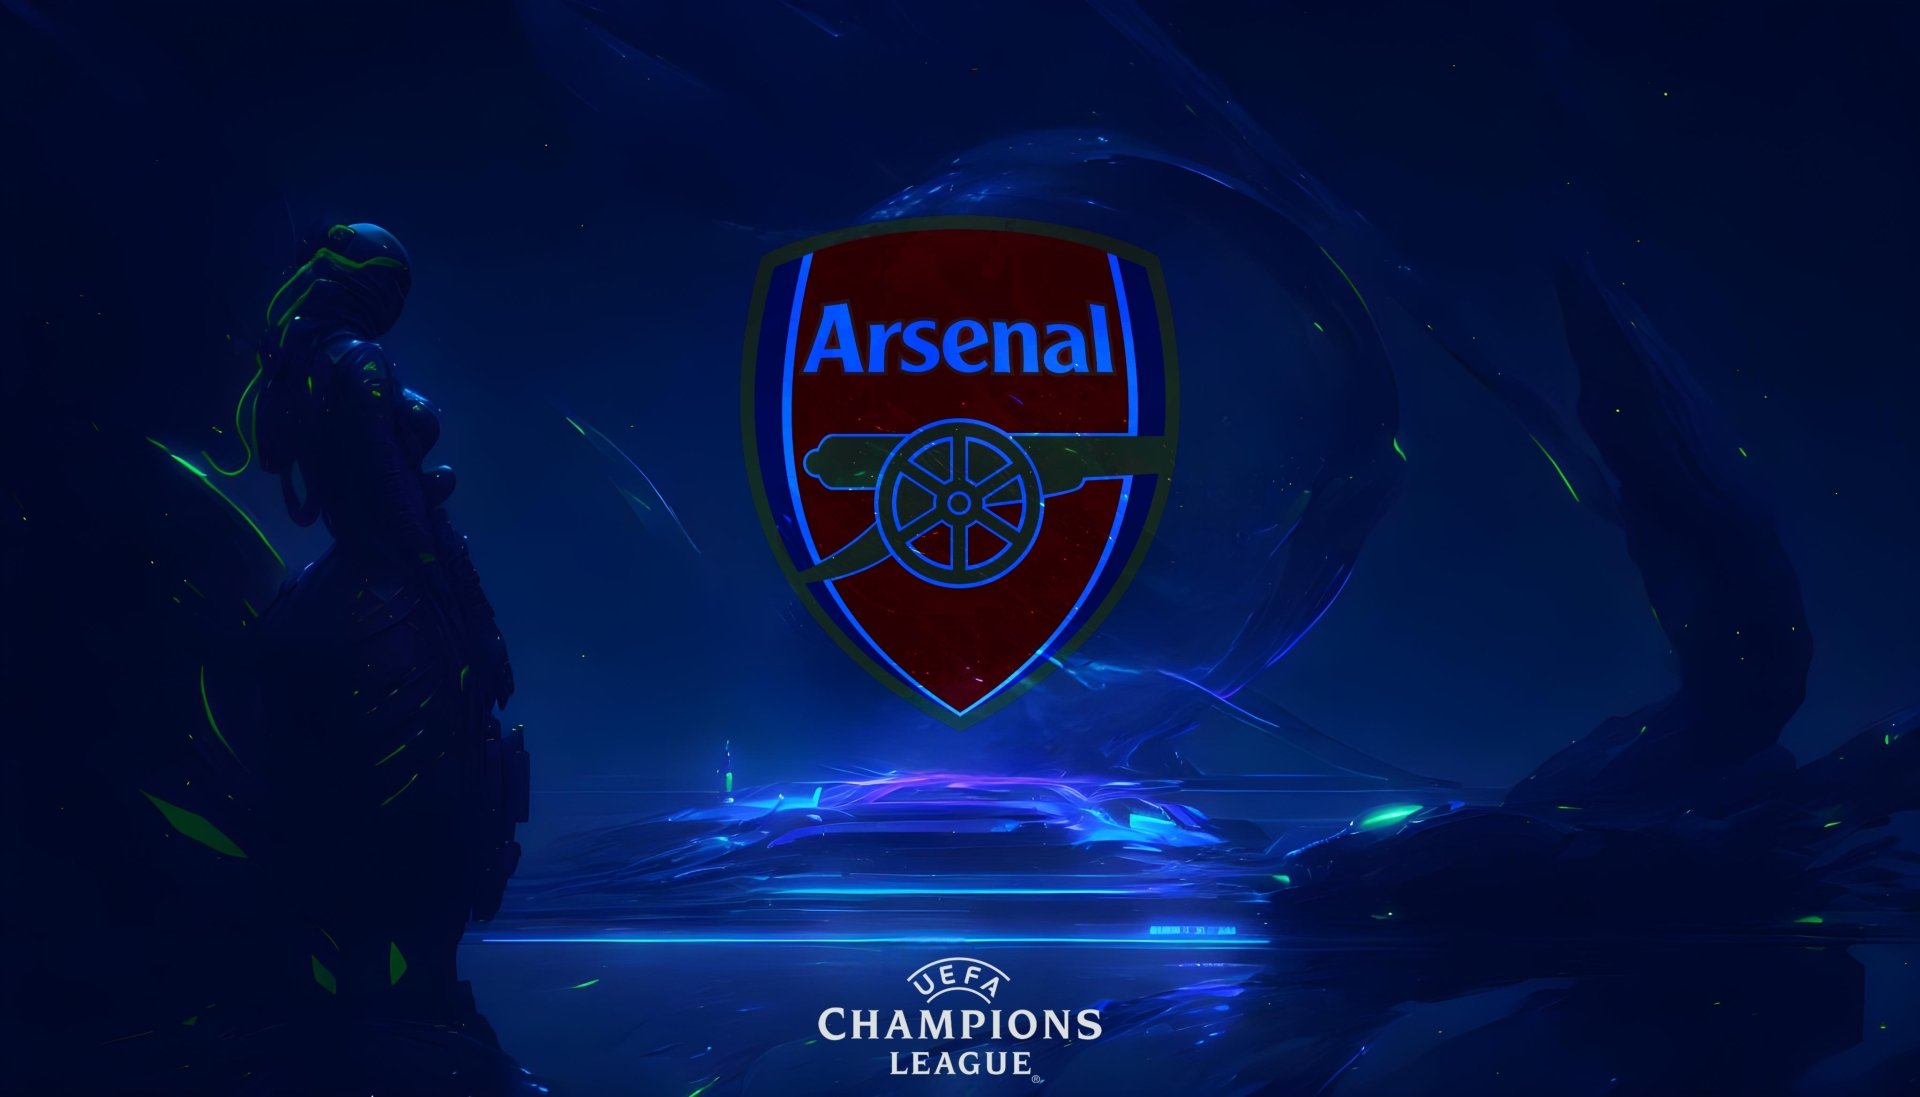 70+ Arsenal F.C. HD Wallpapers and Backgrounds